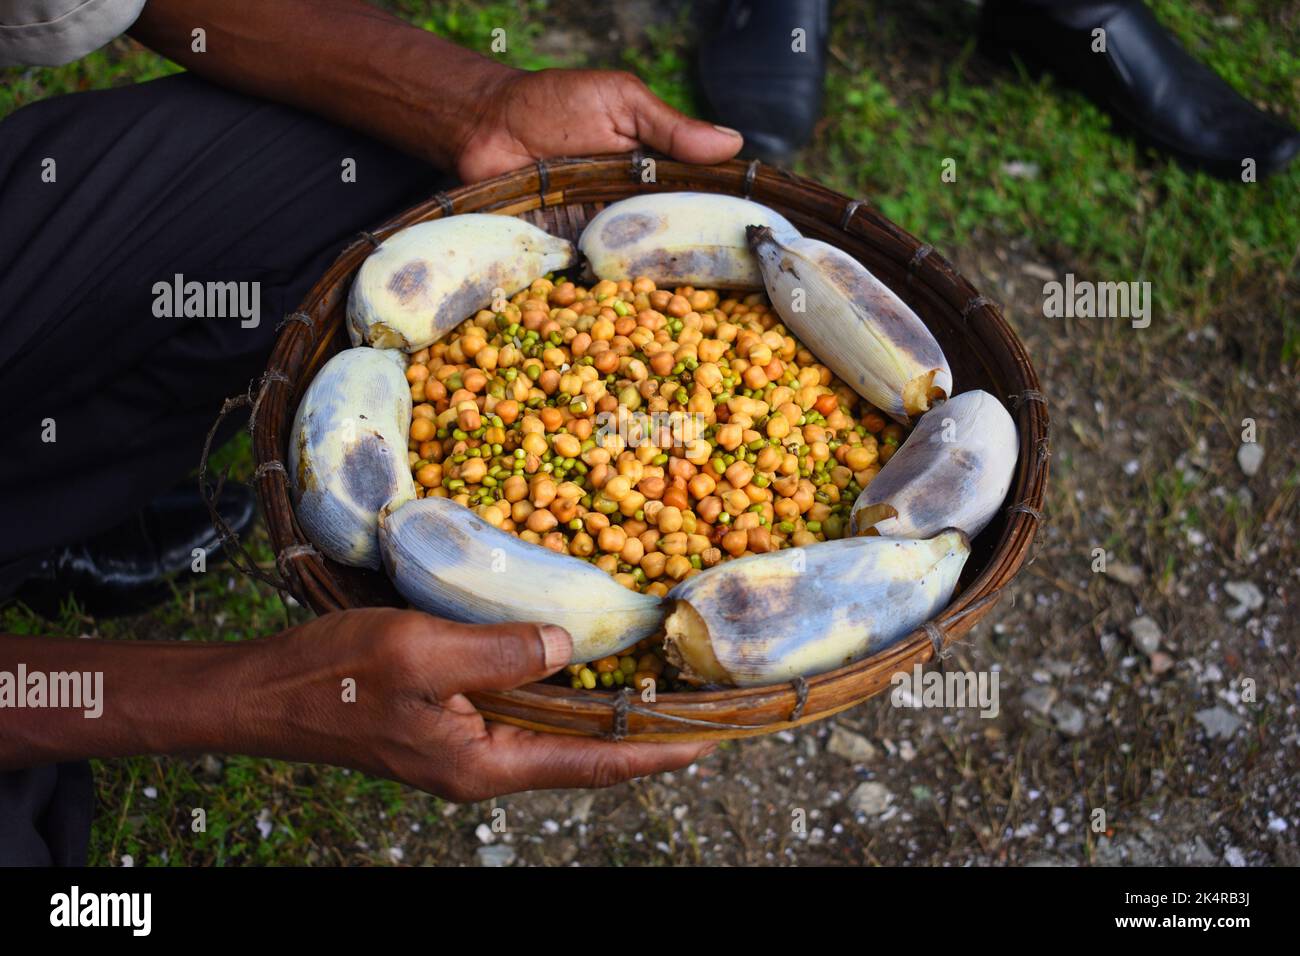 A person holding a basket  full of White chickpea (kabuli chana) and banana Stock Photo